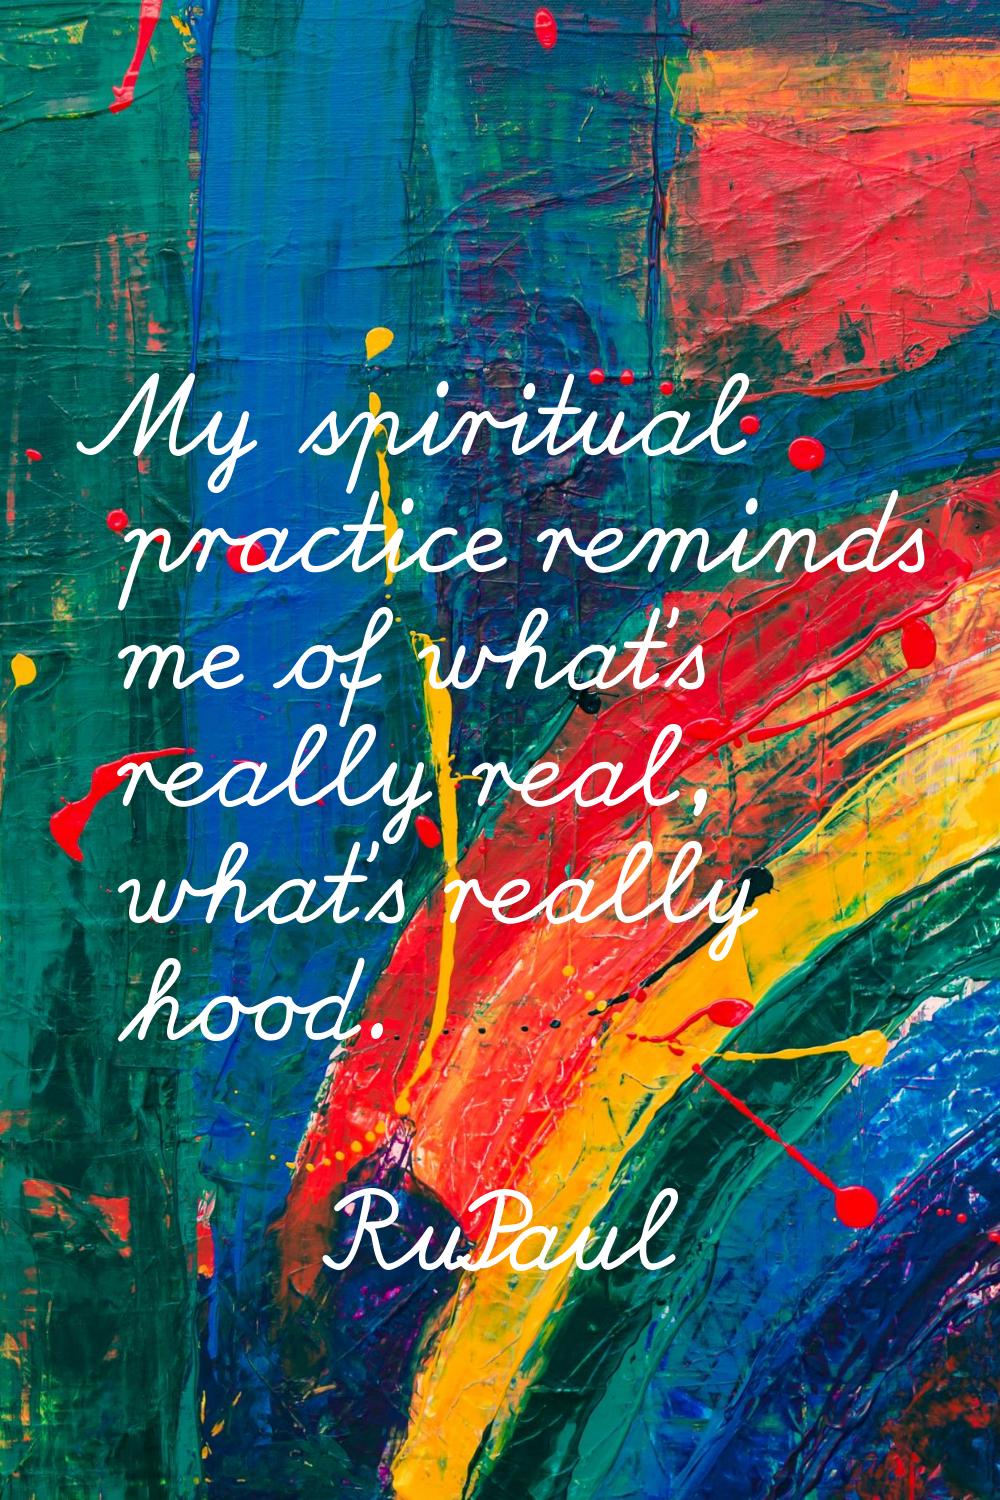 My spiritual practice reminds me of what's really real, what's really hood.